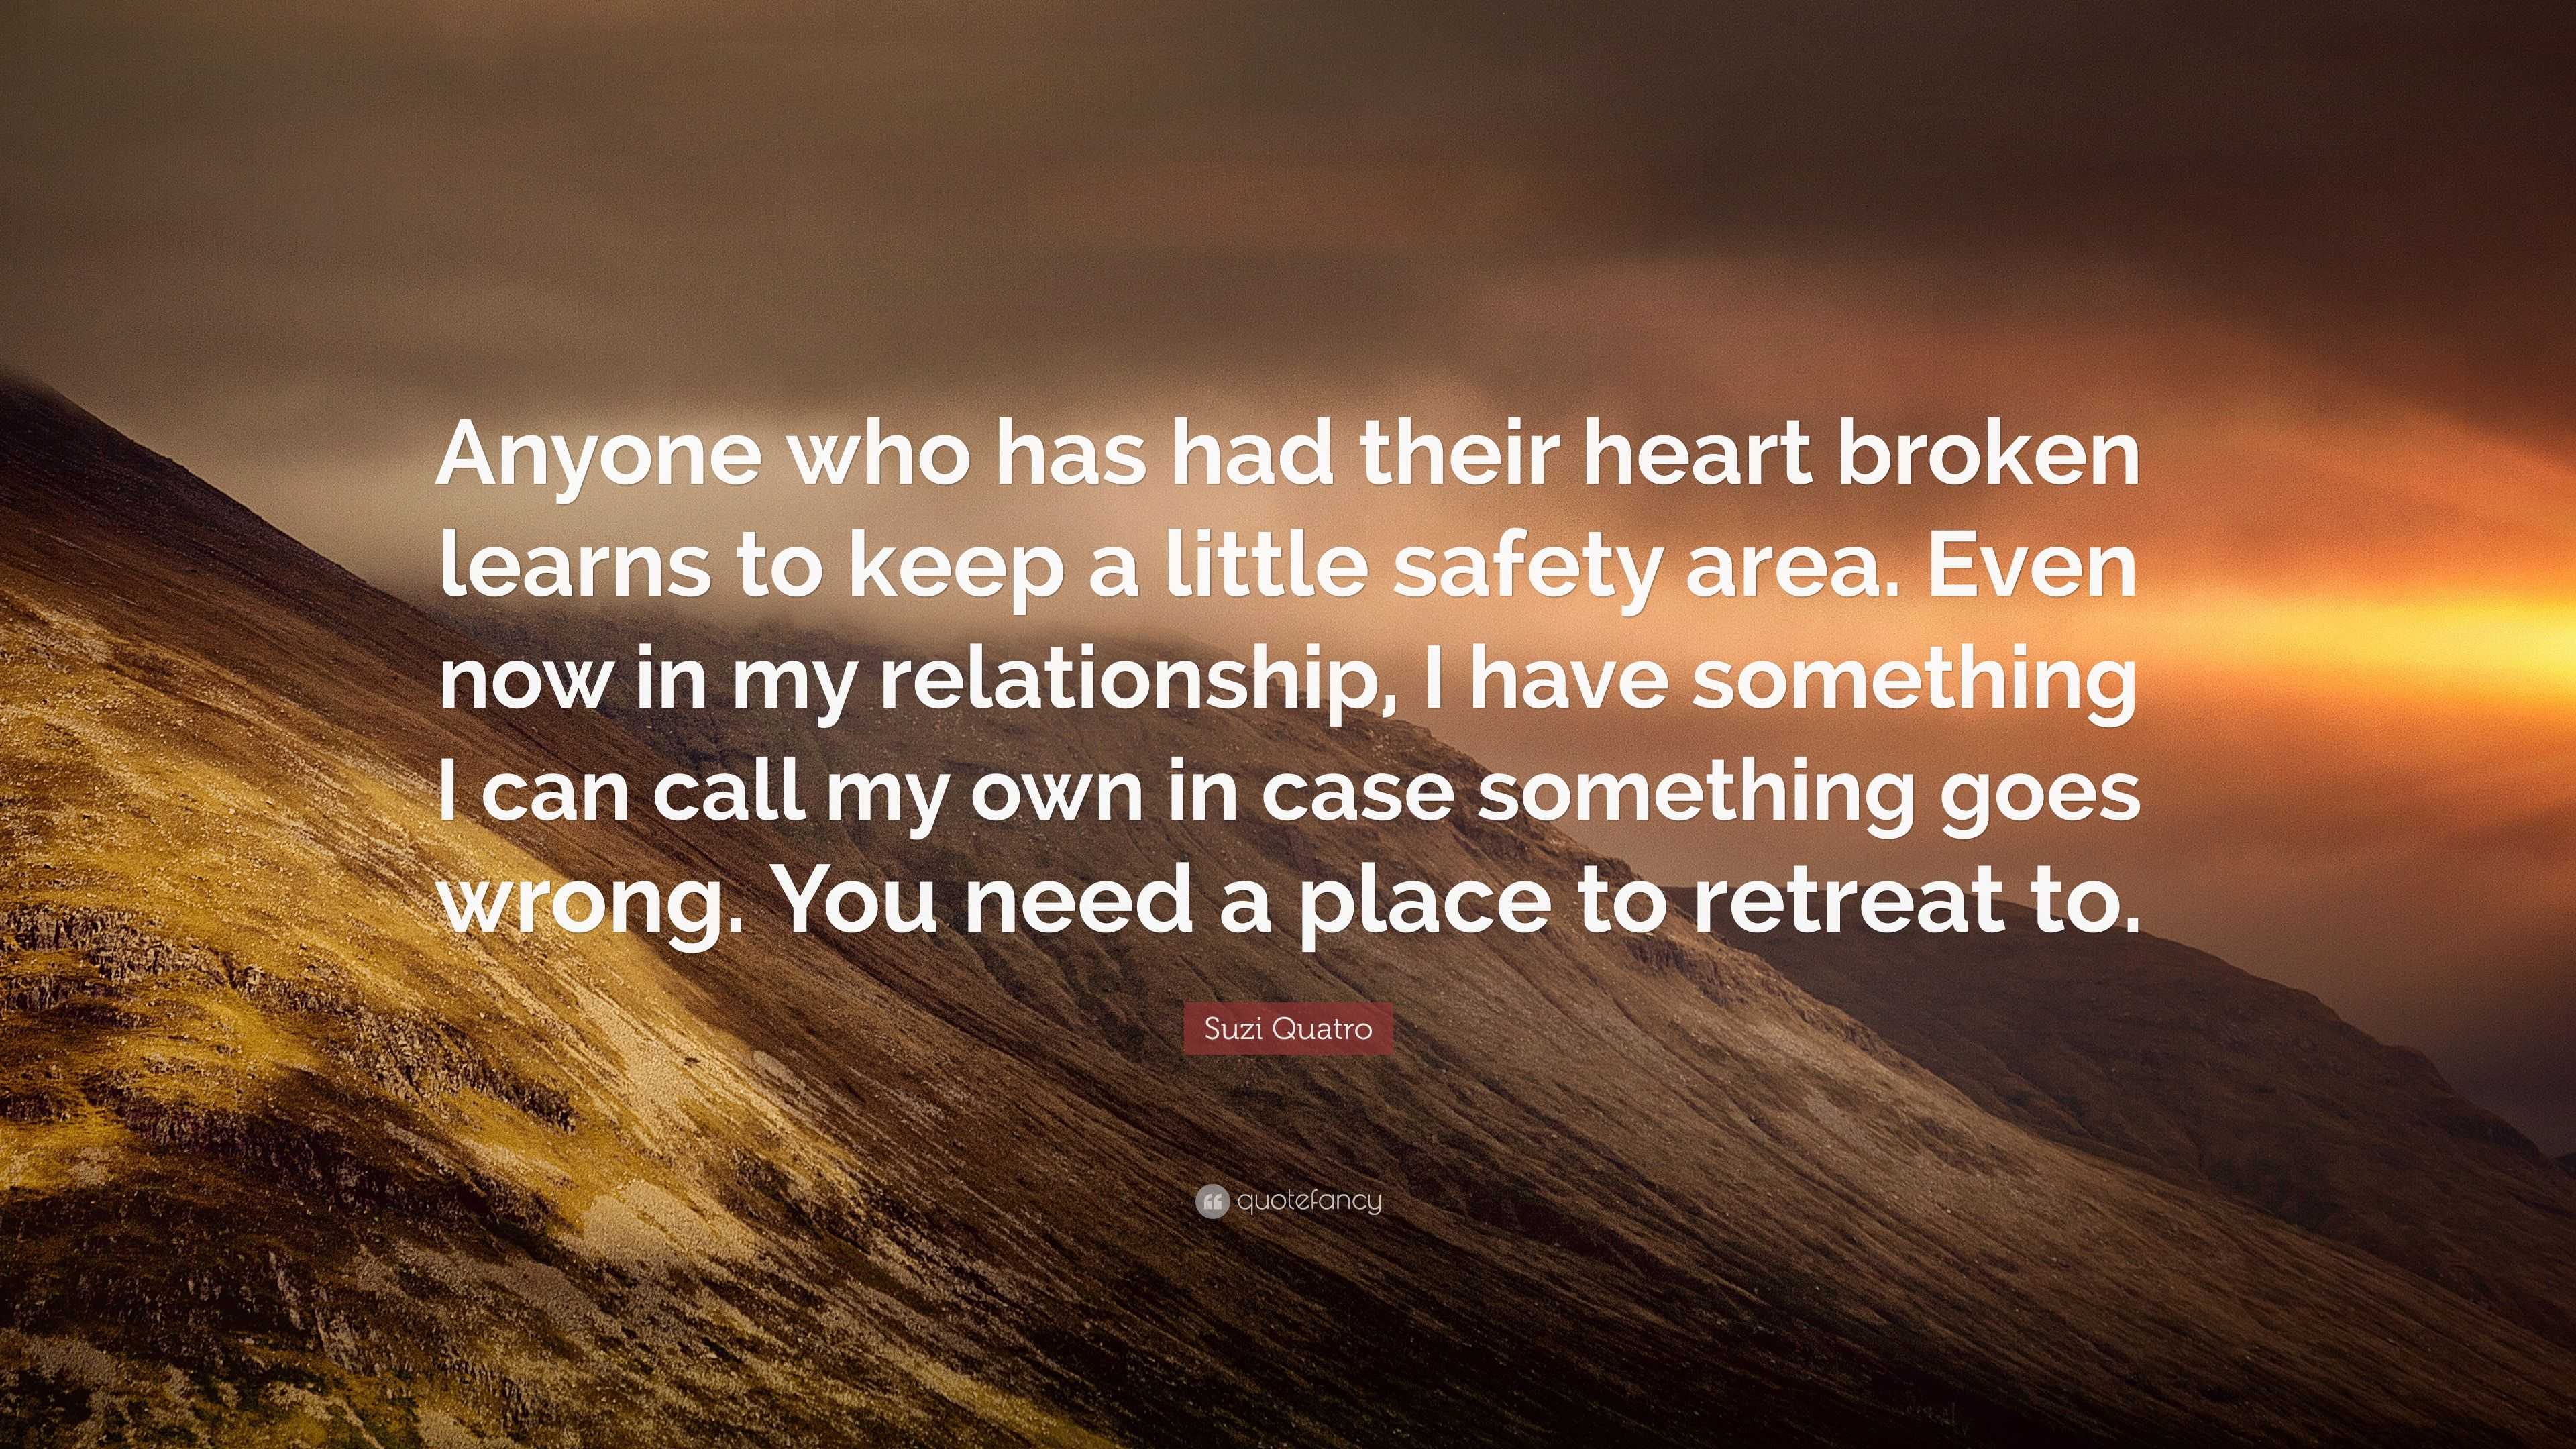 Suzi Quatro Quote: “Anyone who has had their heart broken learns to ...